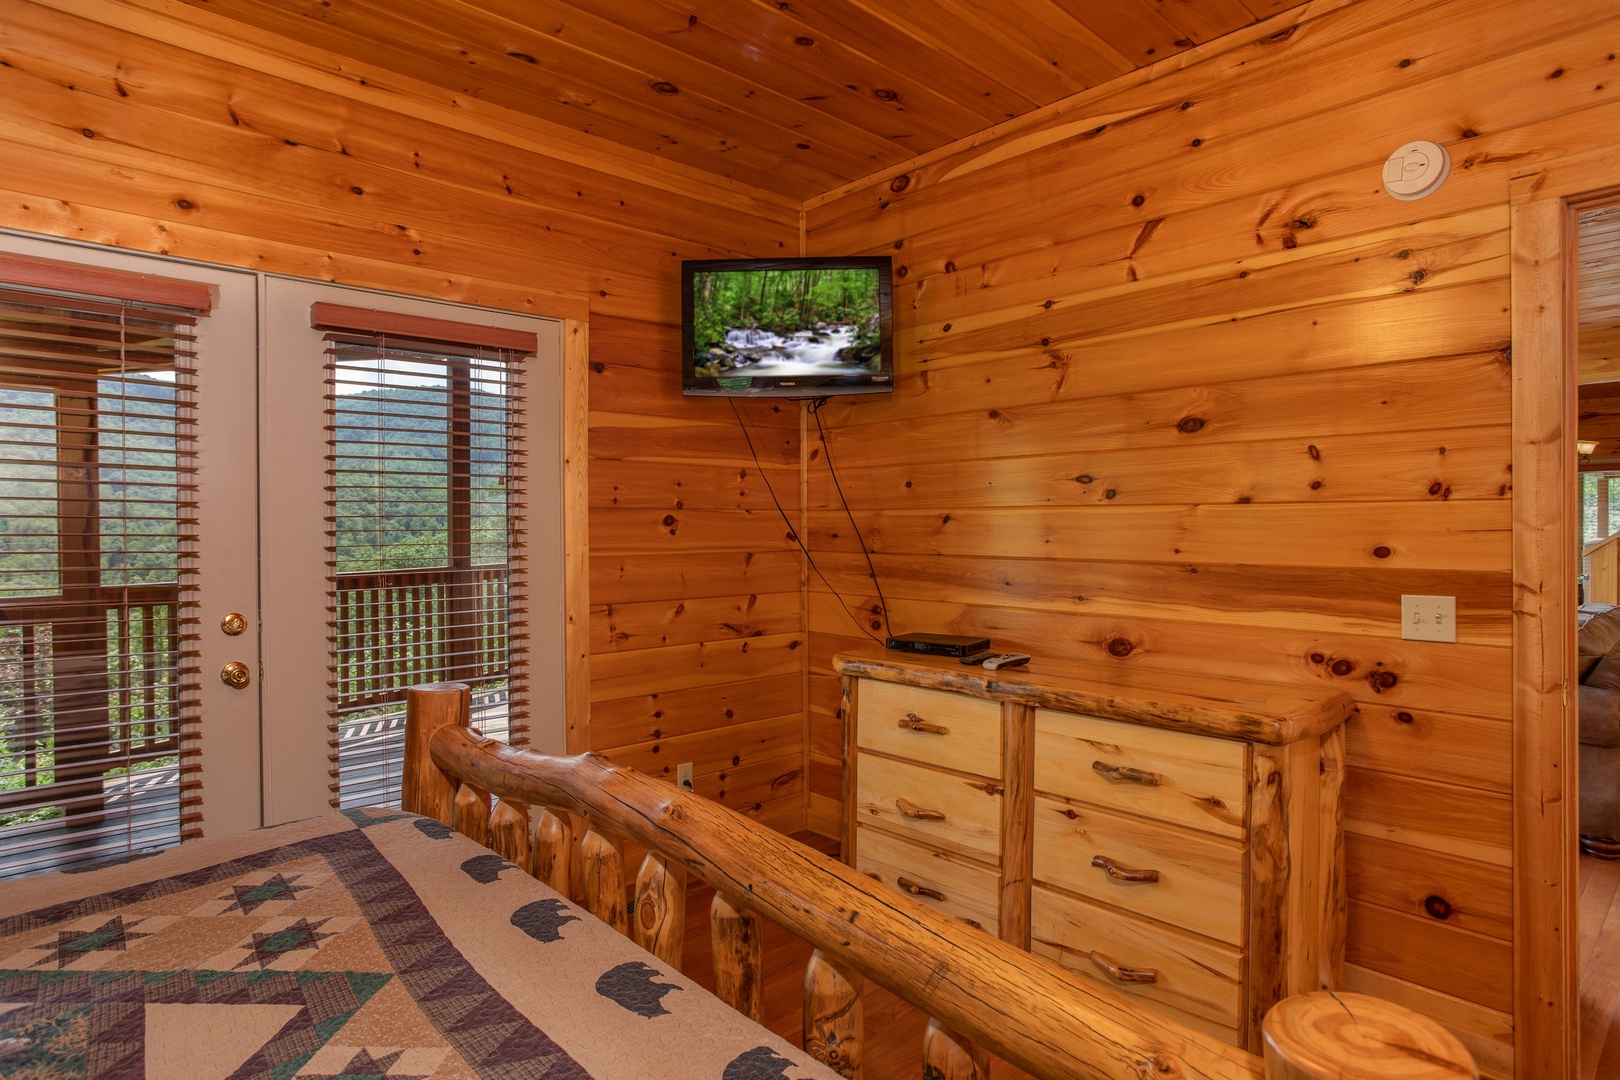 Television, dresser, and deck access in a bedroom at Four Seasons Lodge, a 3-bedroom cabin rental located in Pigeon Forge